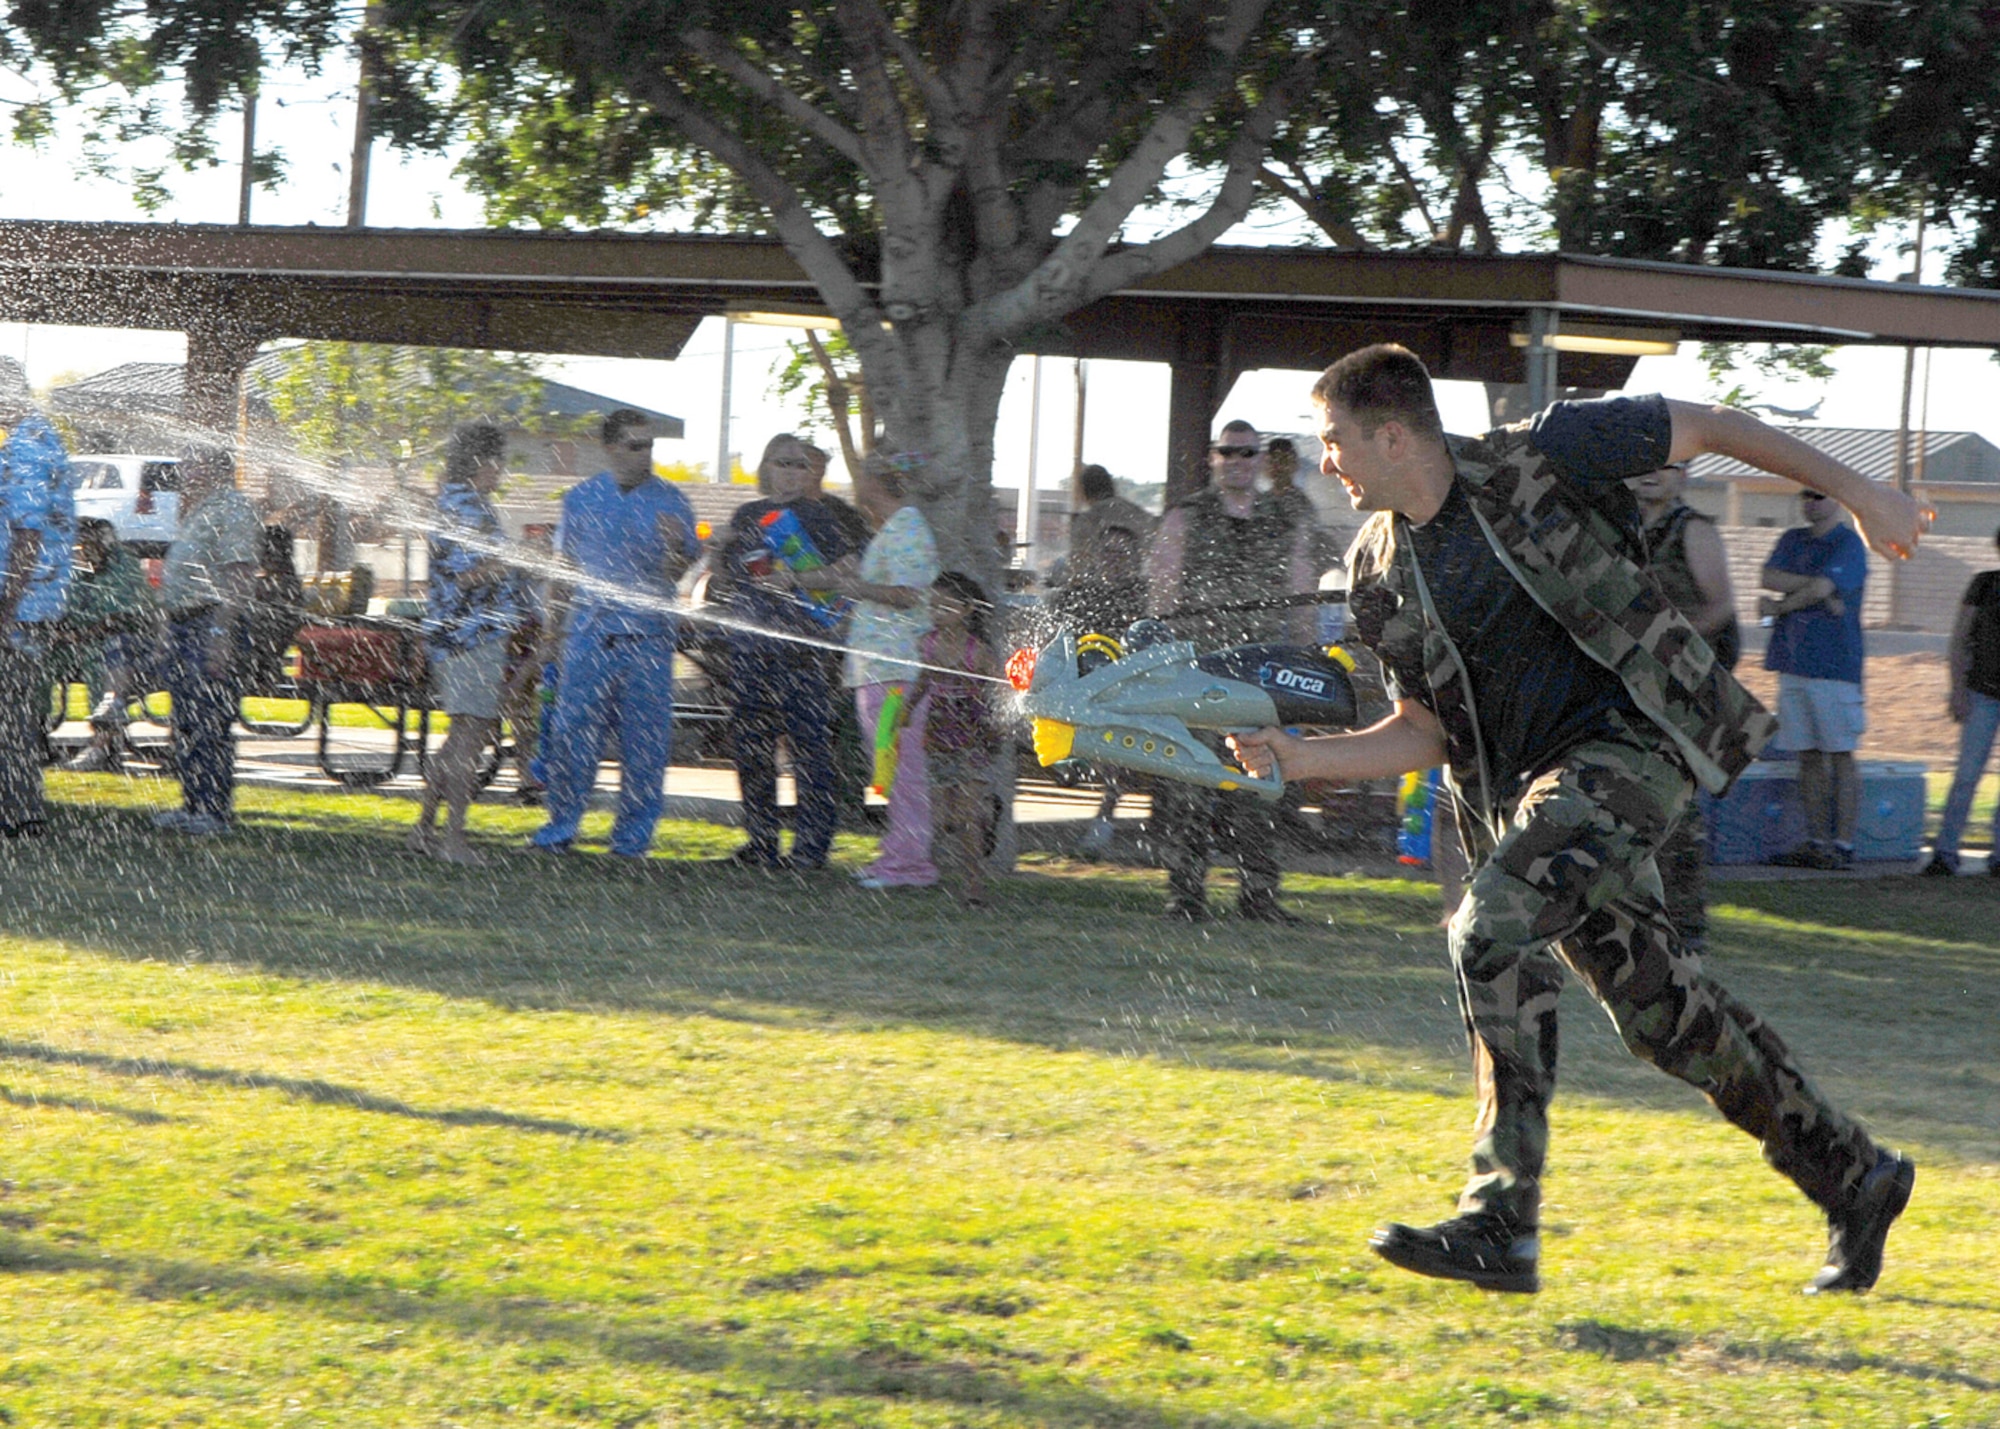 Staff Sgt. Robert Milush, 56th Aerospace Medicine Squadron public health journeyman, sprints across the field squirting water at children during the 56th Medical Group MASH Bash held at Fowler Park Saturday. (U.S. Air Force photo/Airman 1st Class Ronifel Yasay)